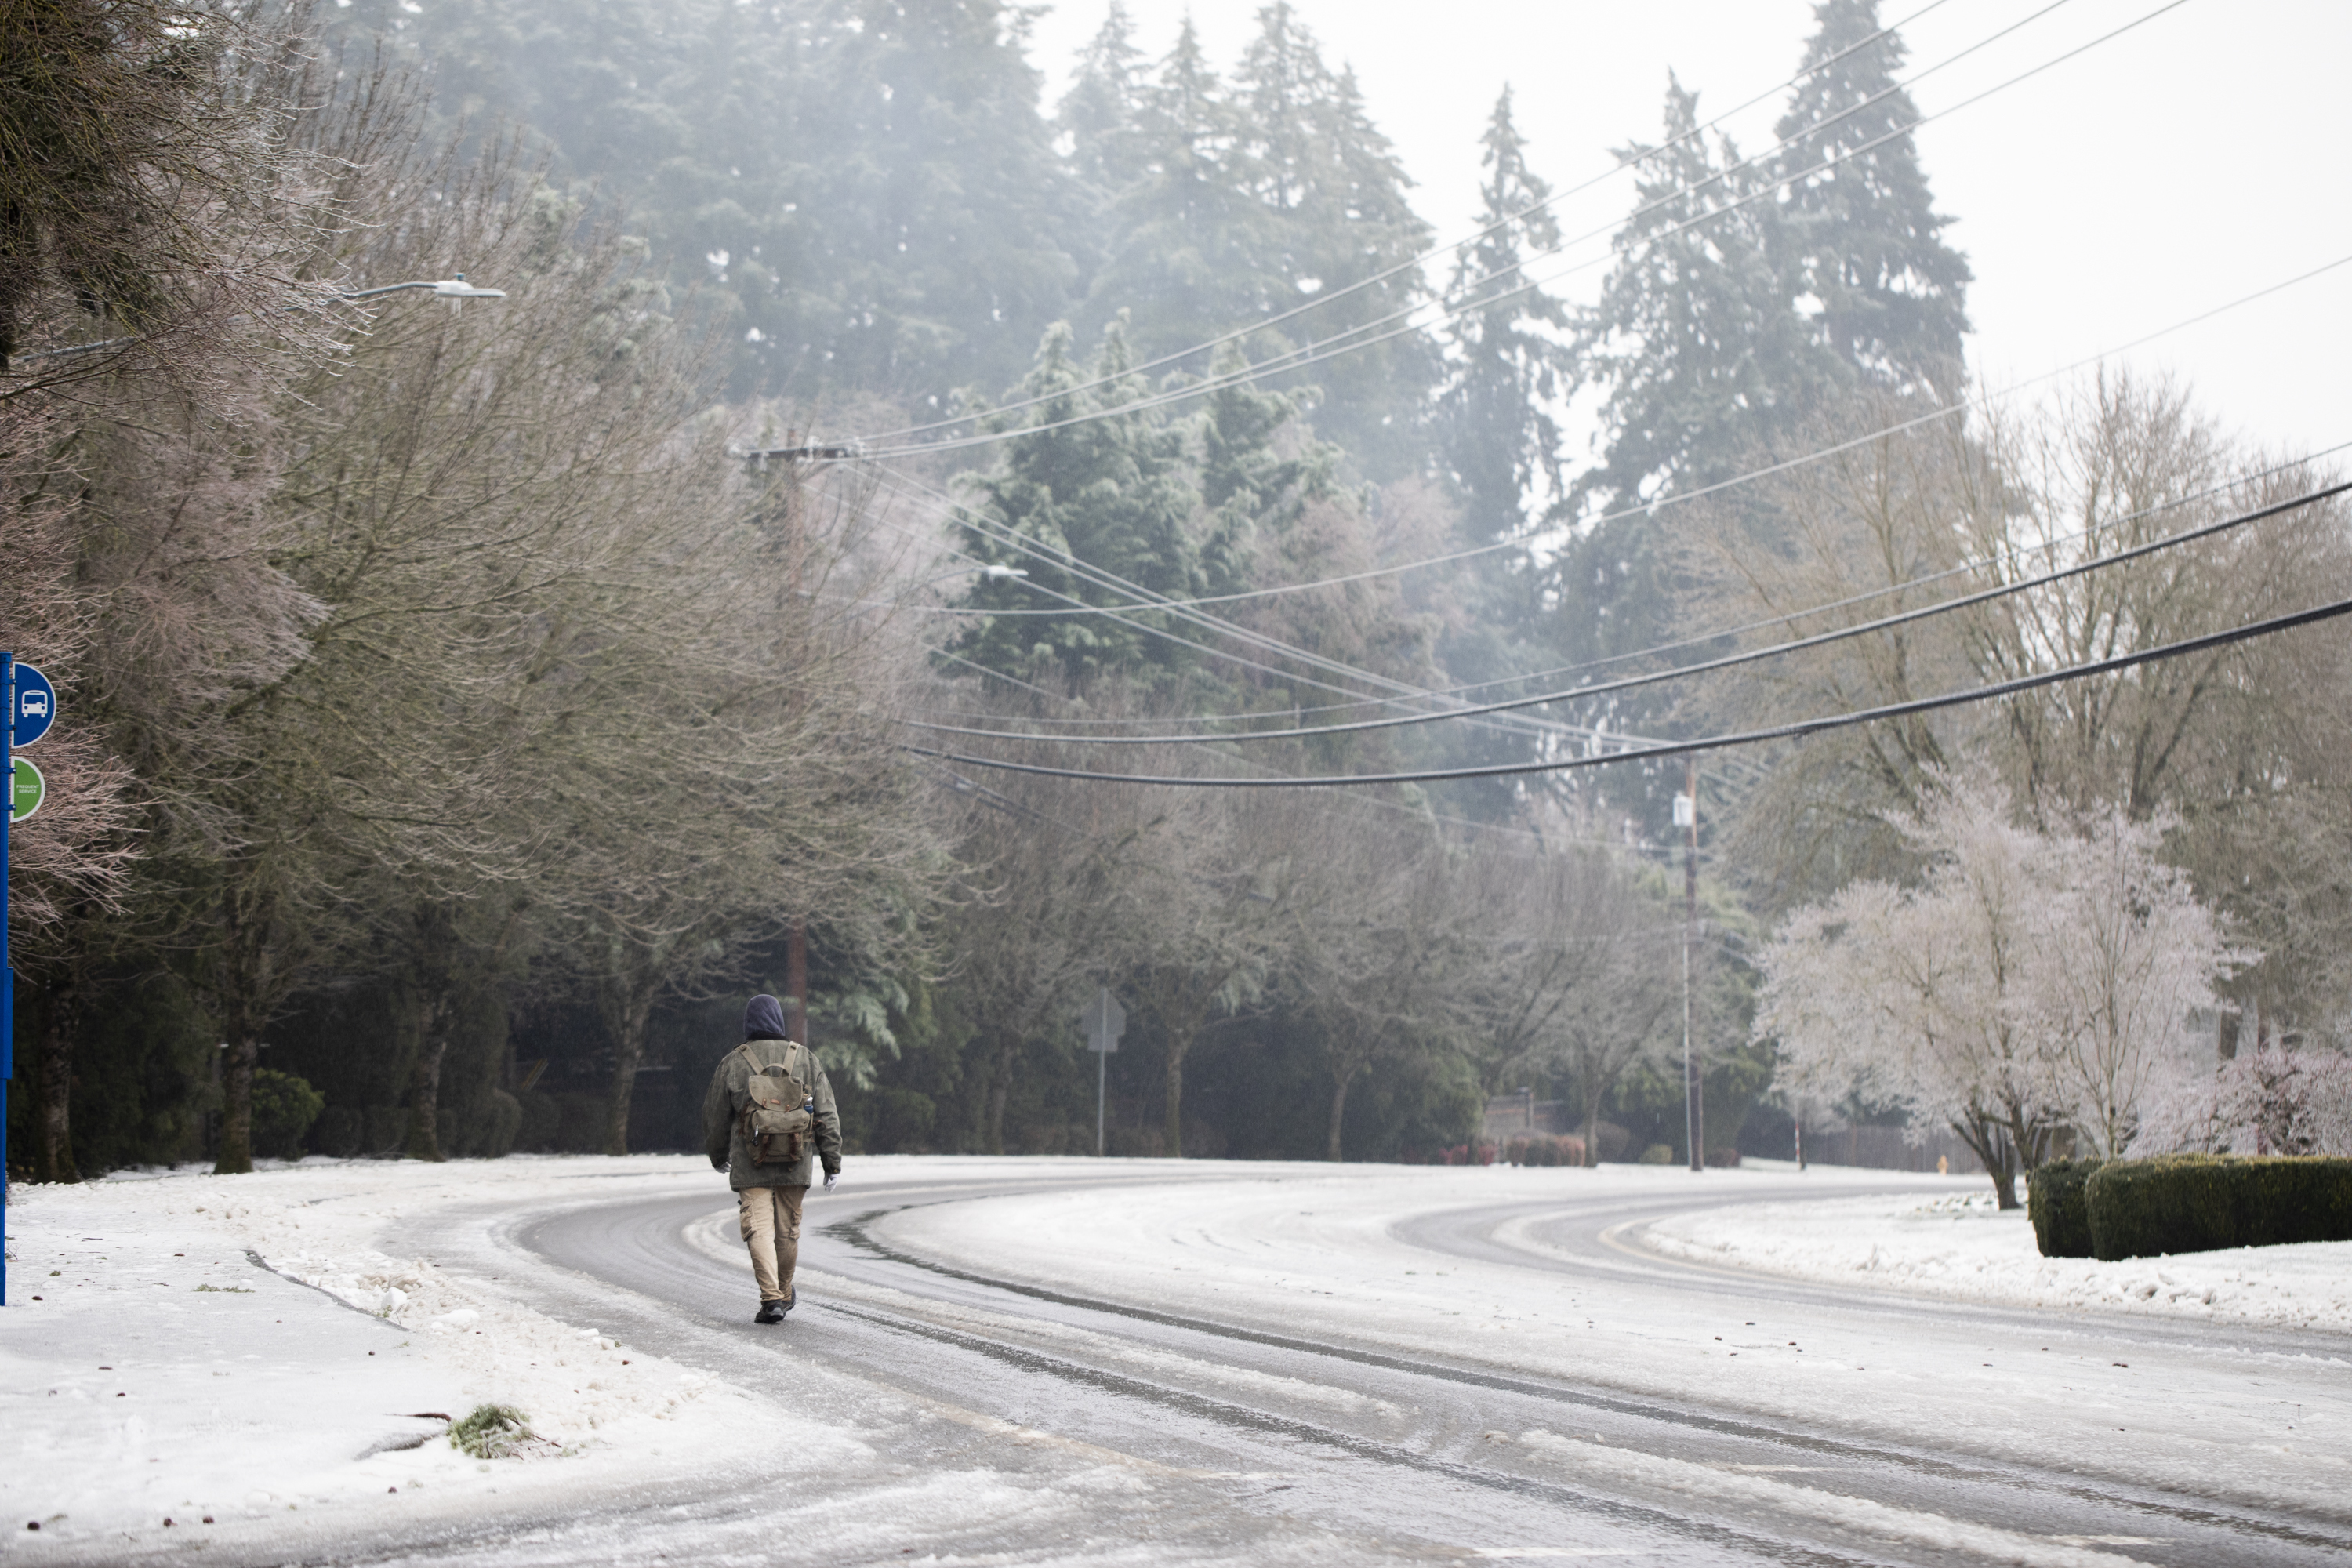 Columbia Gorge, Hood River Valley brace for ice storm this weekend